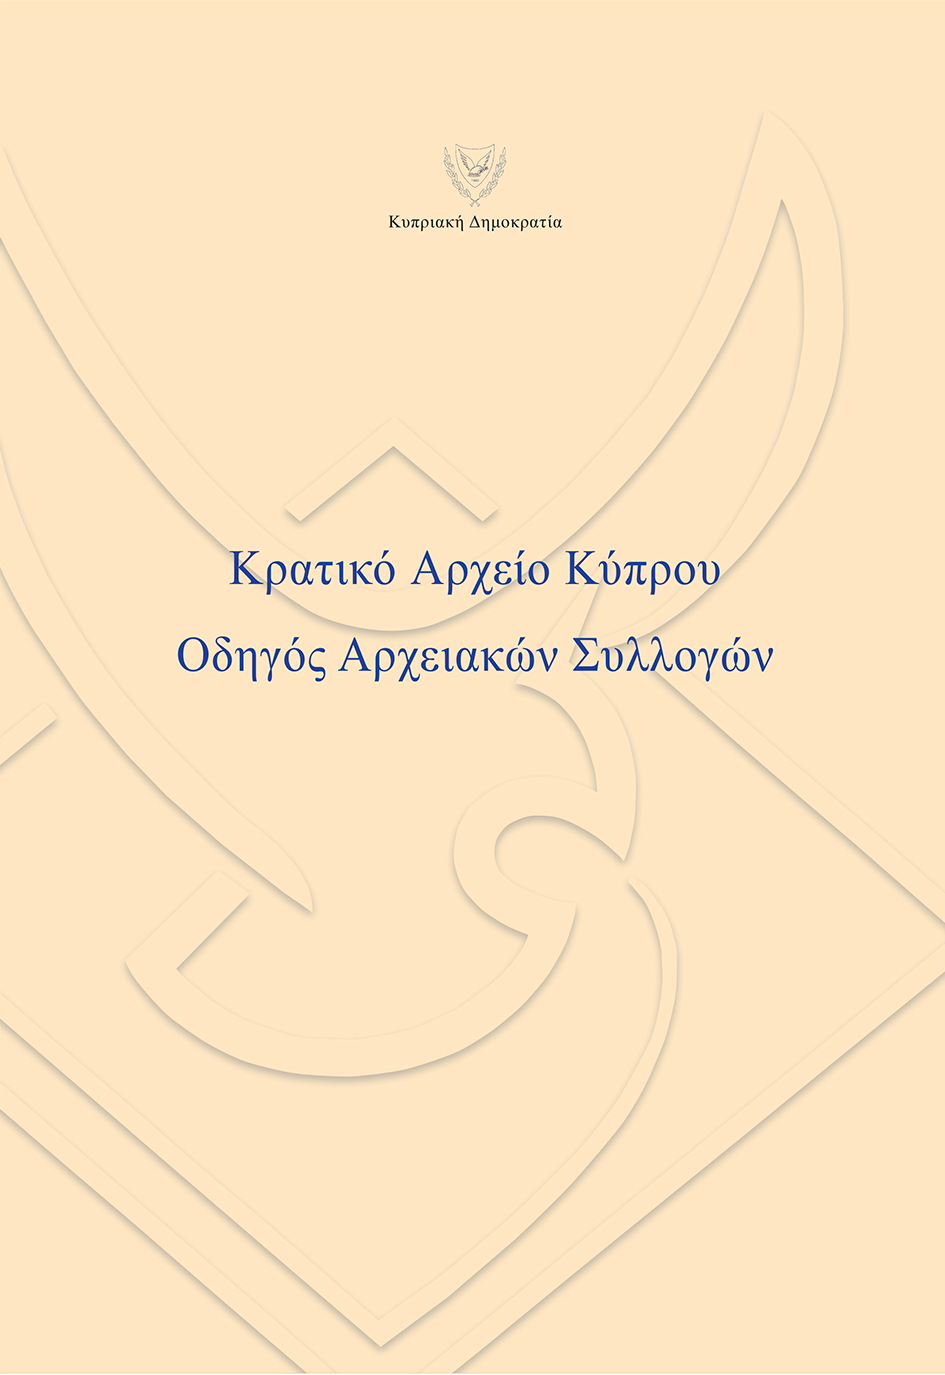 Cyprus State Archives, Catalogue of Archival Collections